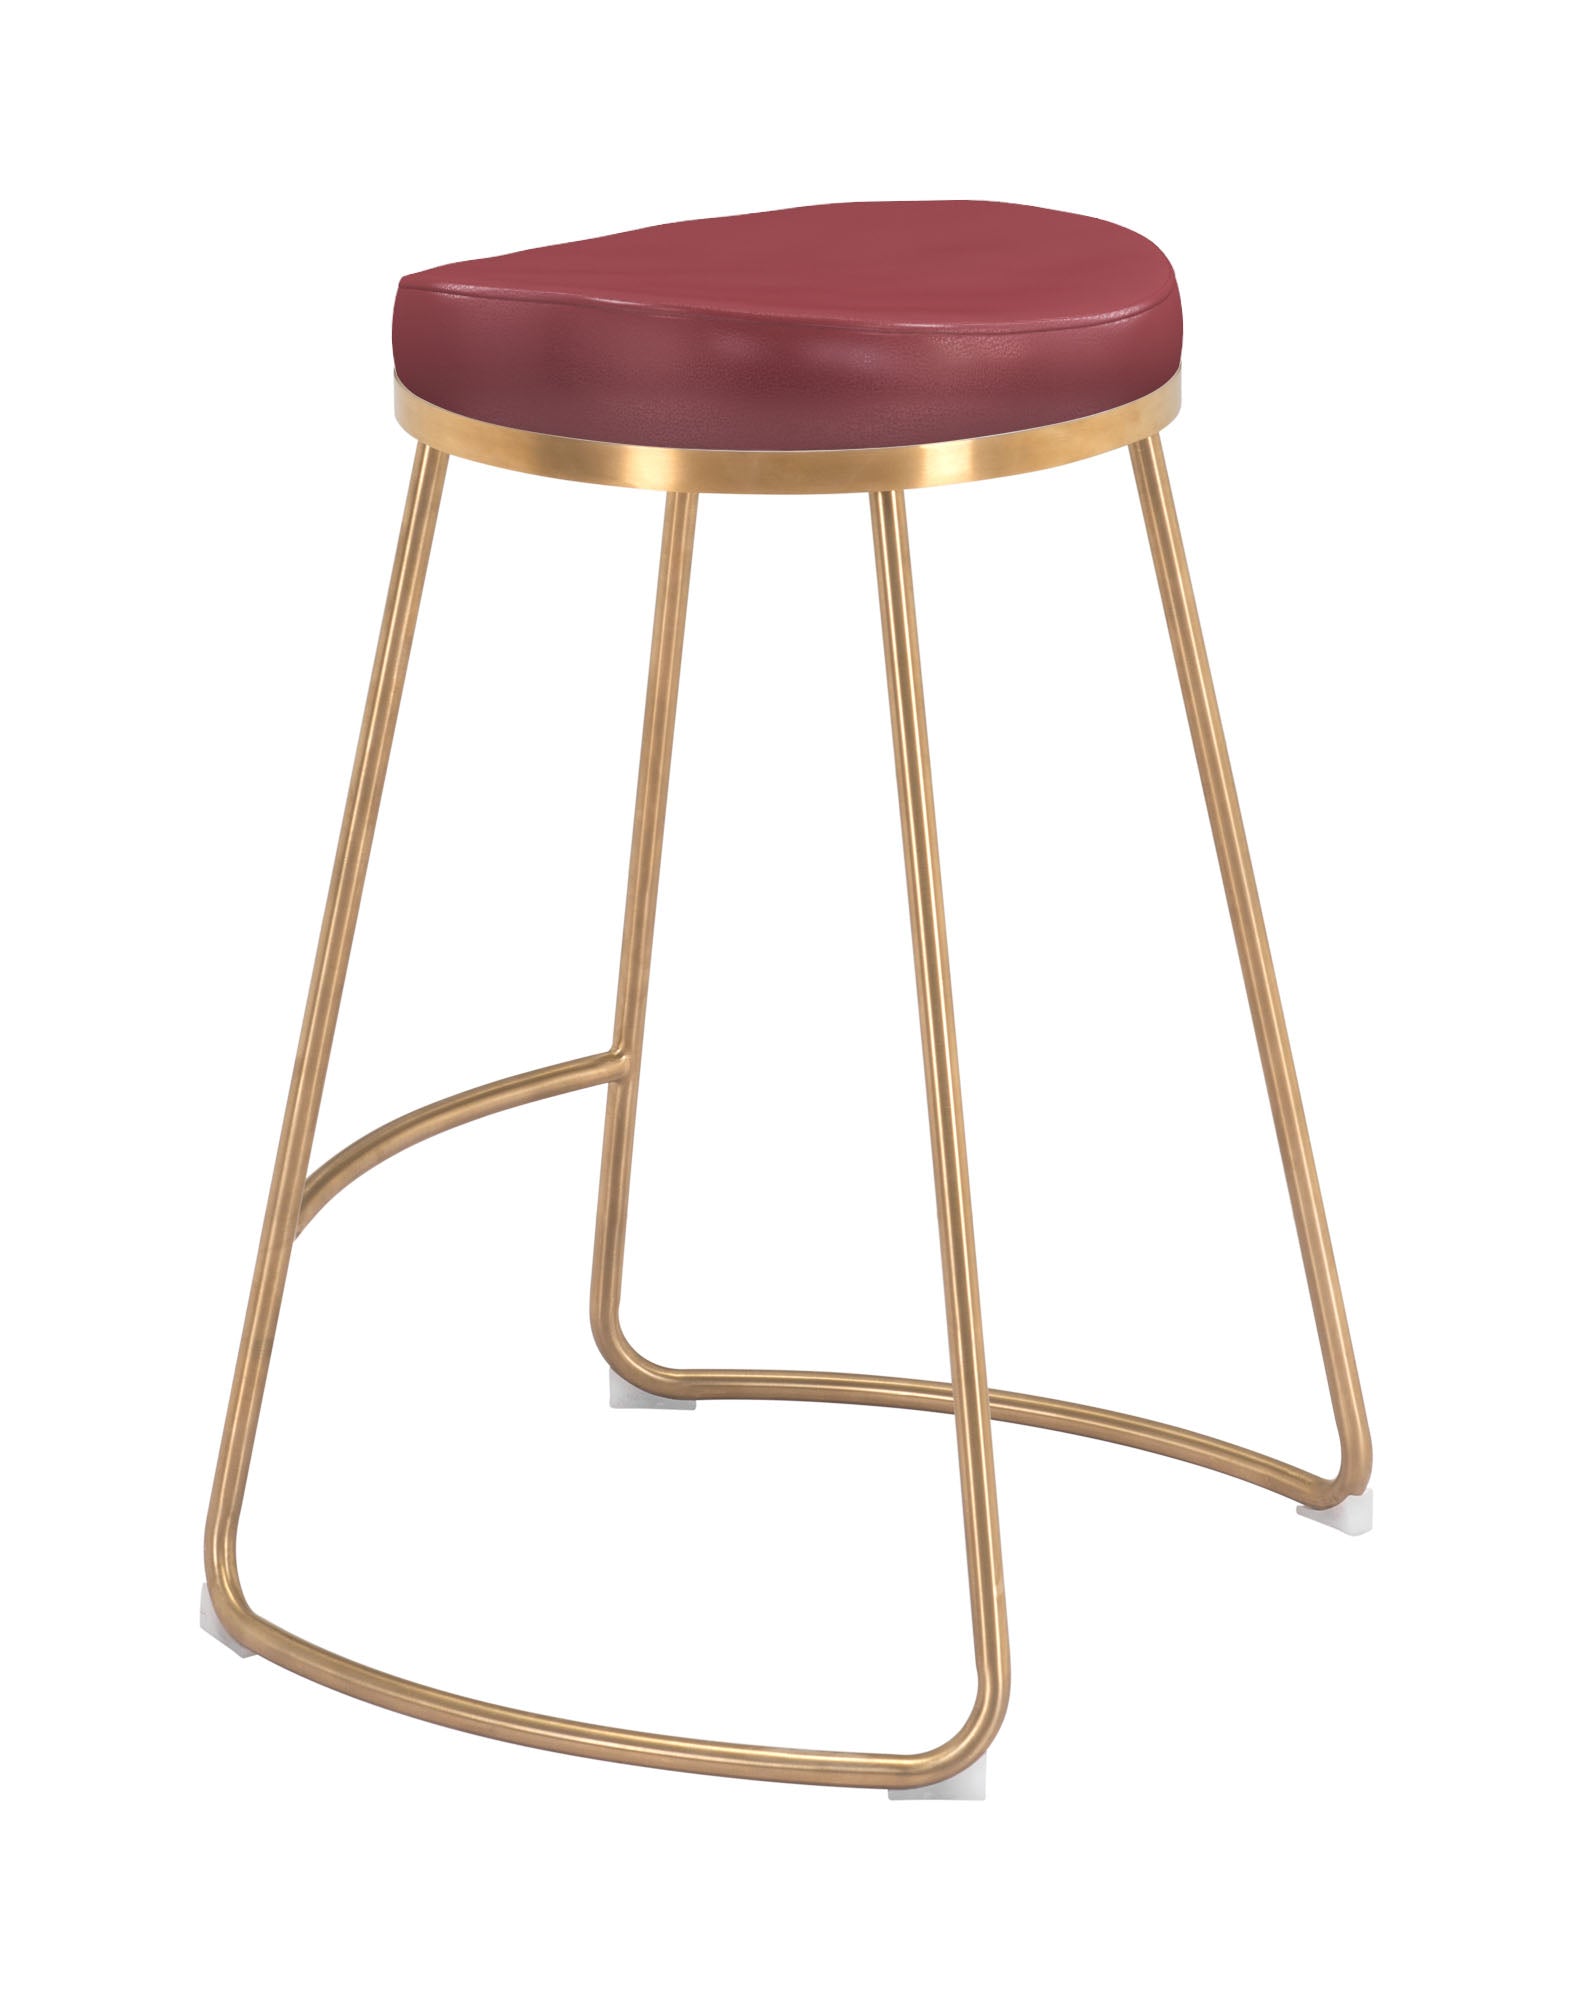 Bree Counter Stool (Set of 2) Burgundy & Gold